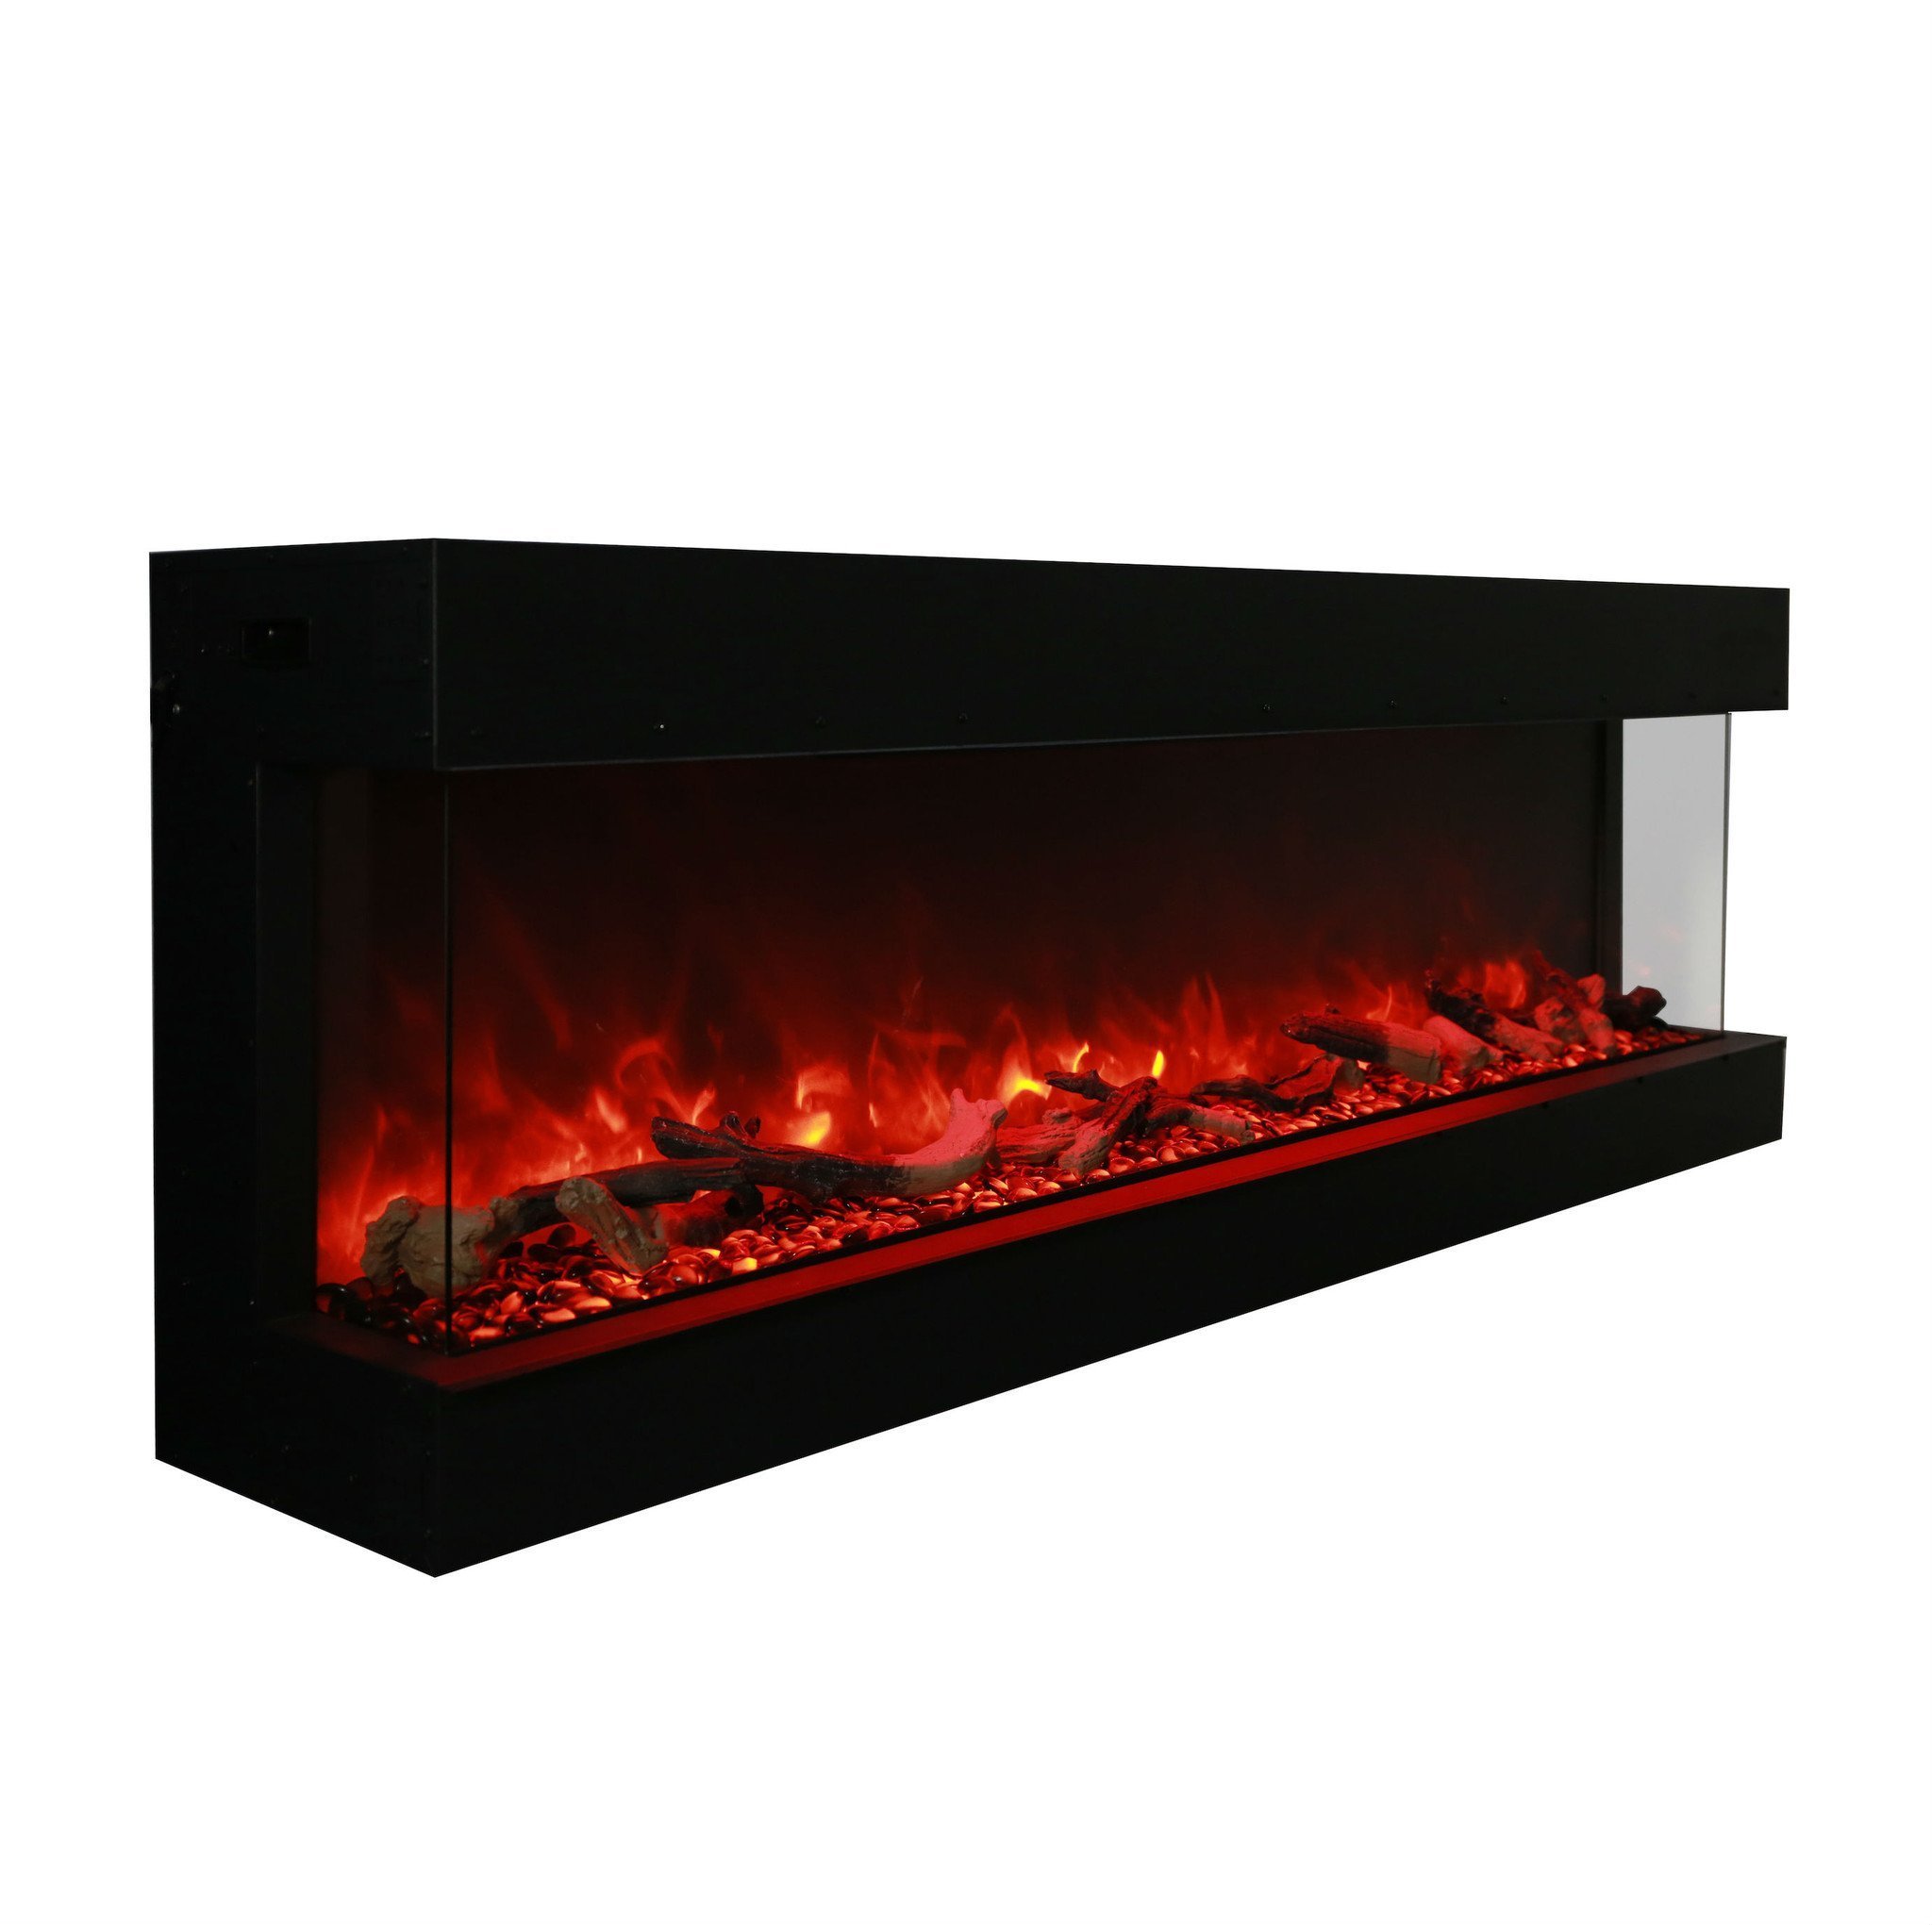 2 Sided Electric Fireplace Lovely Outdoor Electric Fireplaces On Sale Modern Blaze